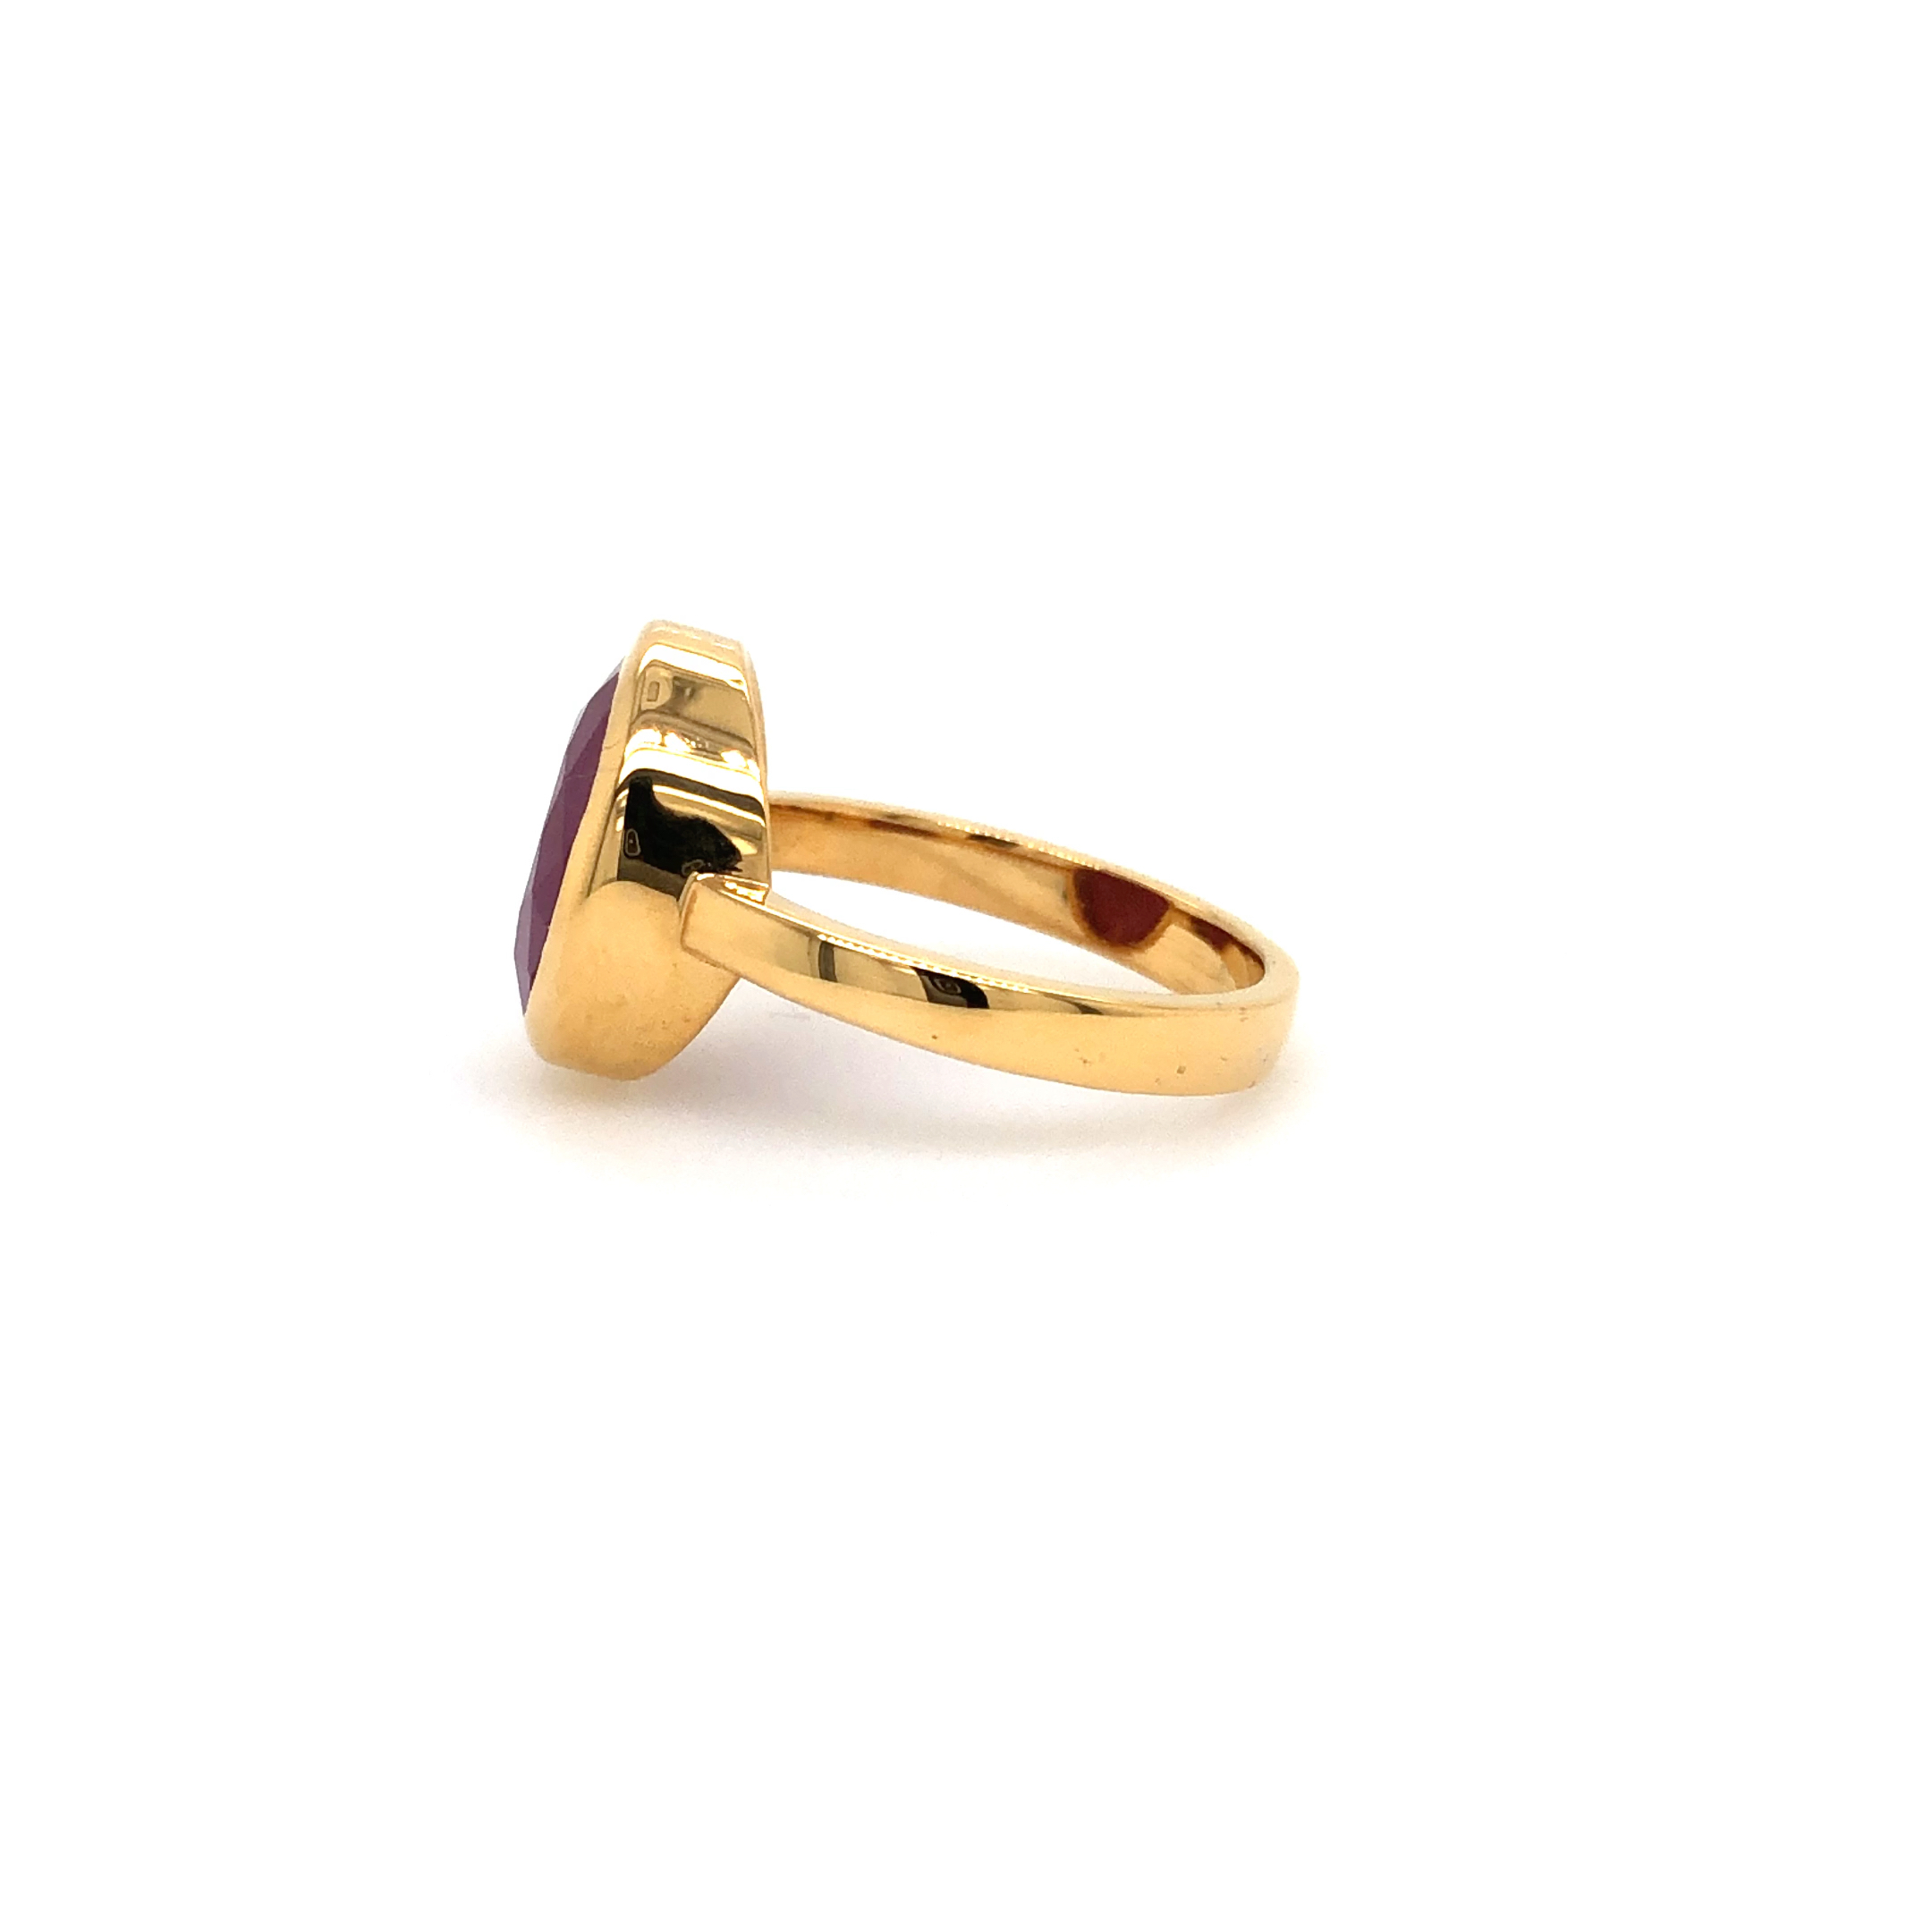 our enchanting 22K Gold Ruby Ring